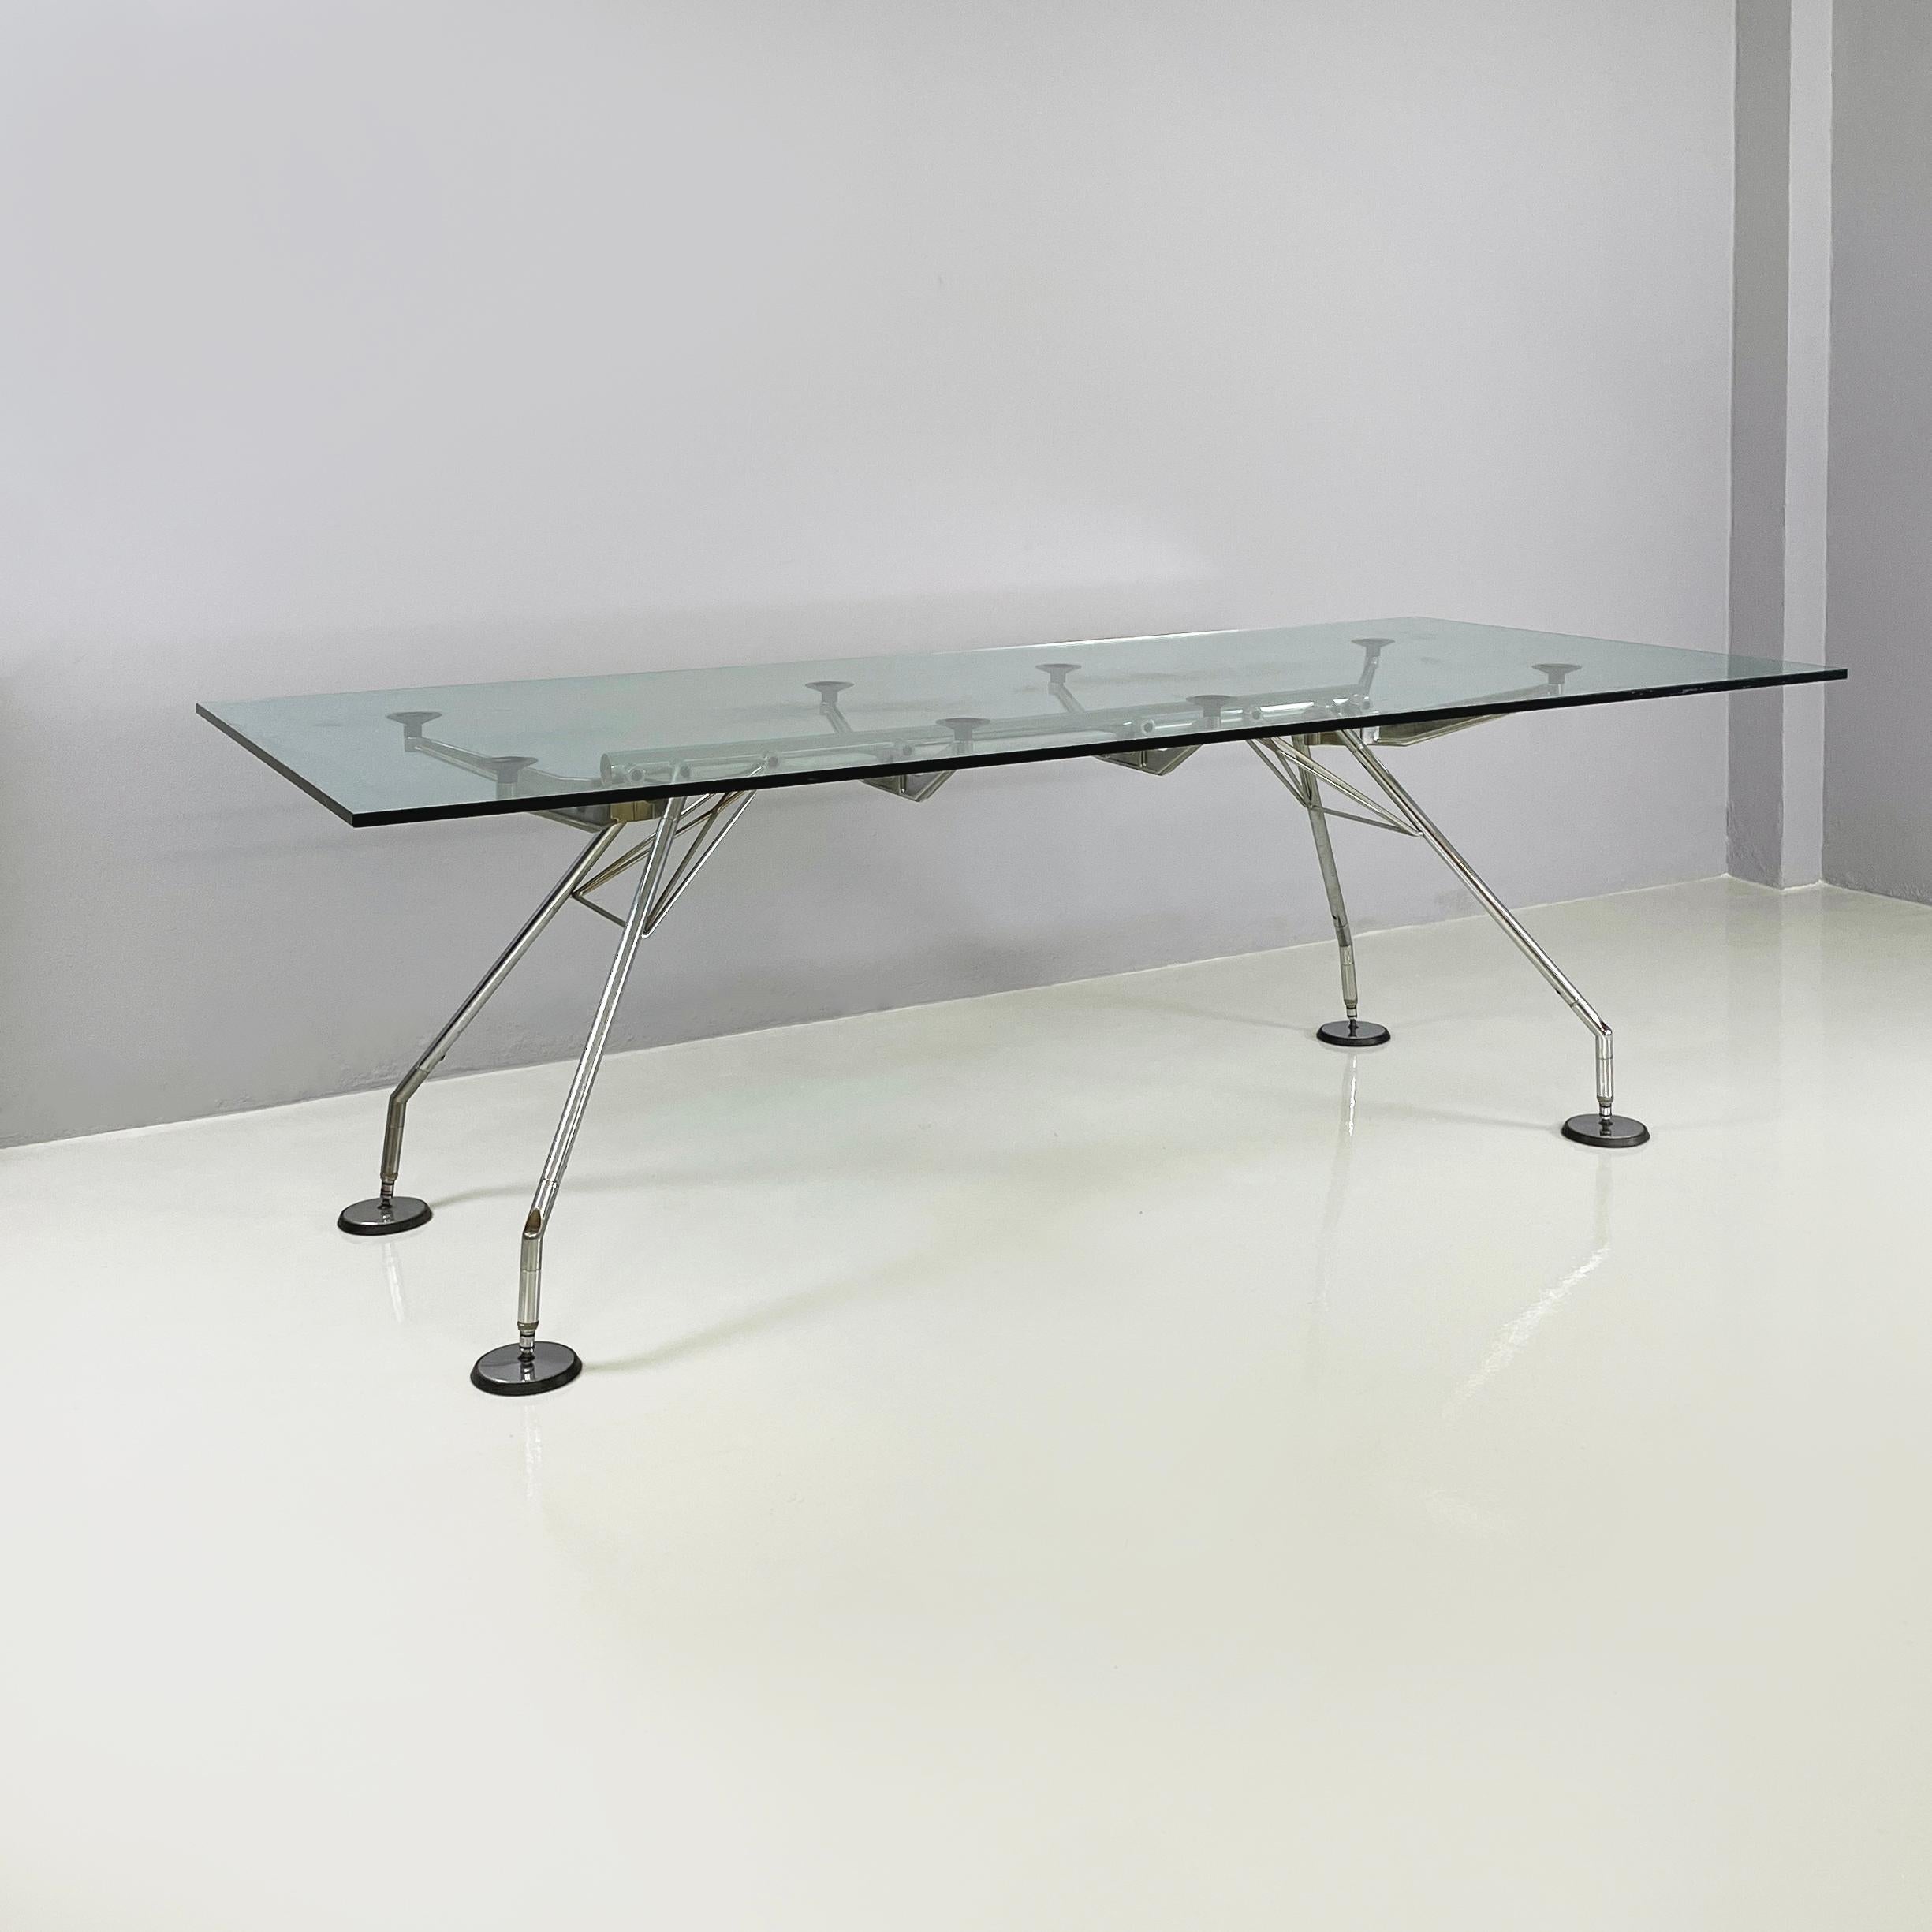 Italian modern Dining or desk table mod. Nomos by Norman Foster for Tecno, 1970s
Iconic dining table mod. Nomos with rectangular top in thick glass. The structure is in chromed steel with support tips and round and black suction cups. It has round